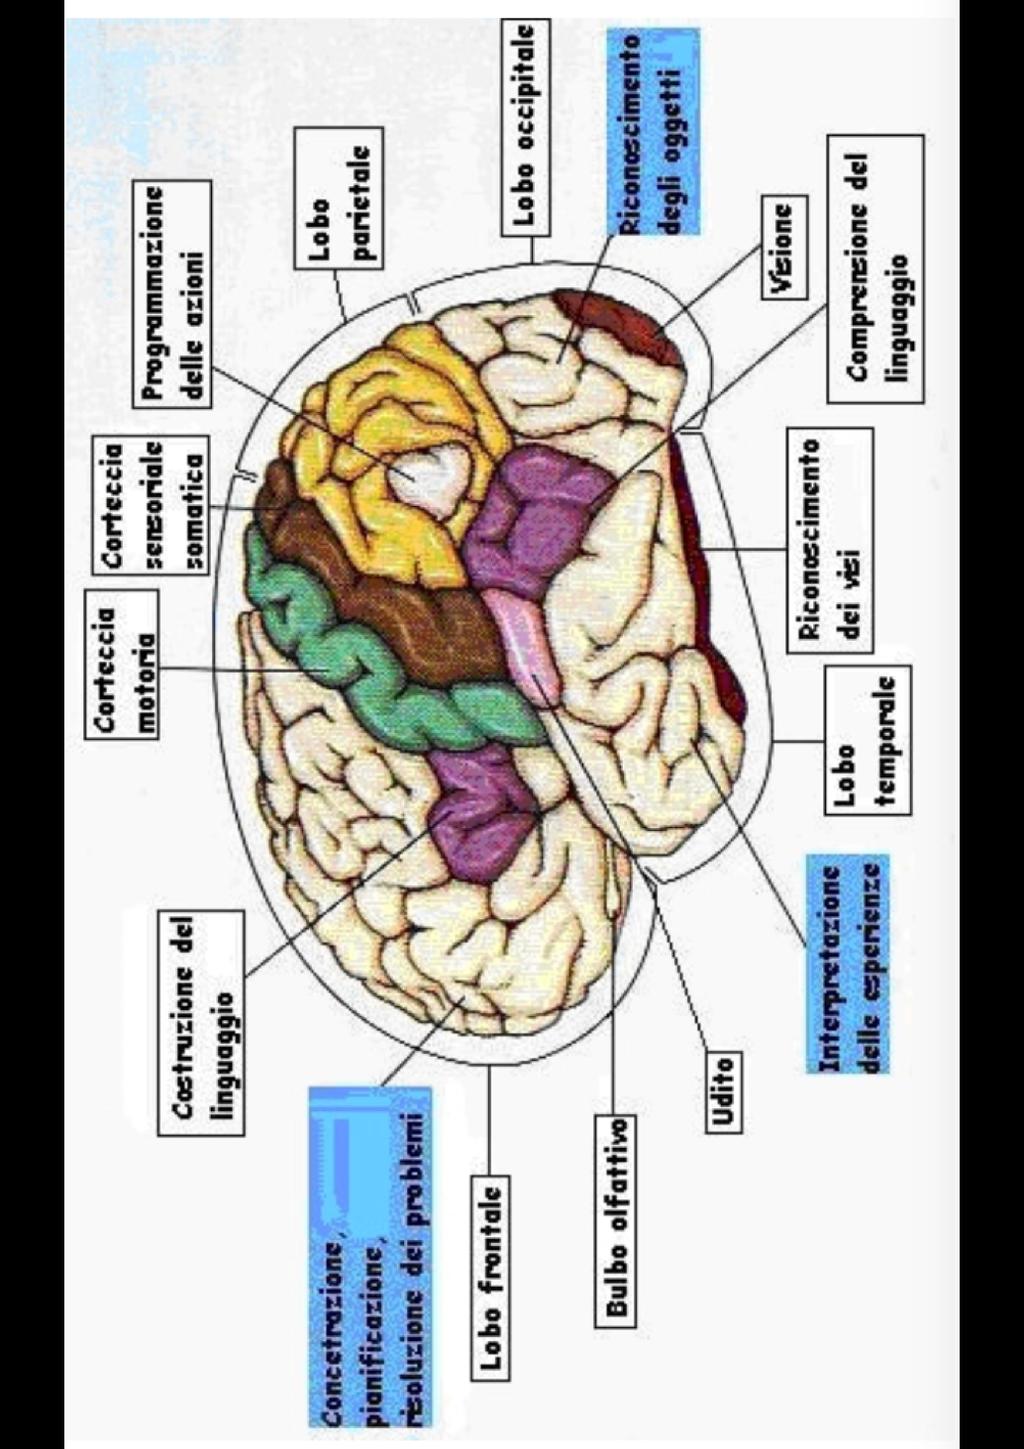 Neuropsychology studies the structure and function of the brain